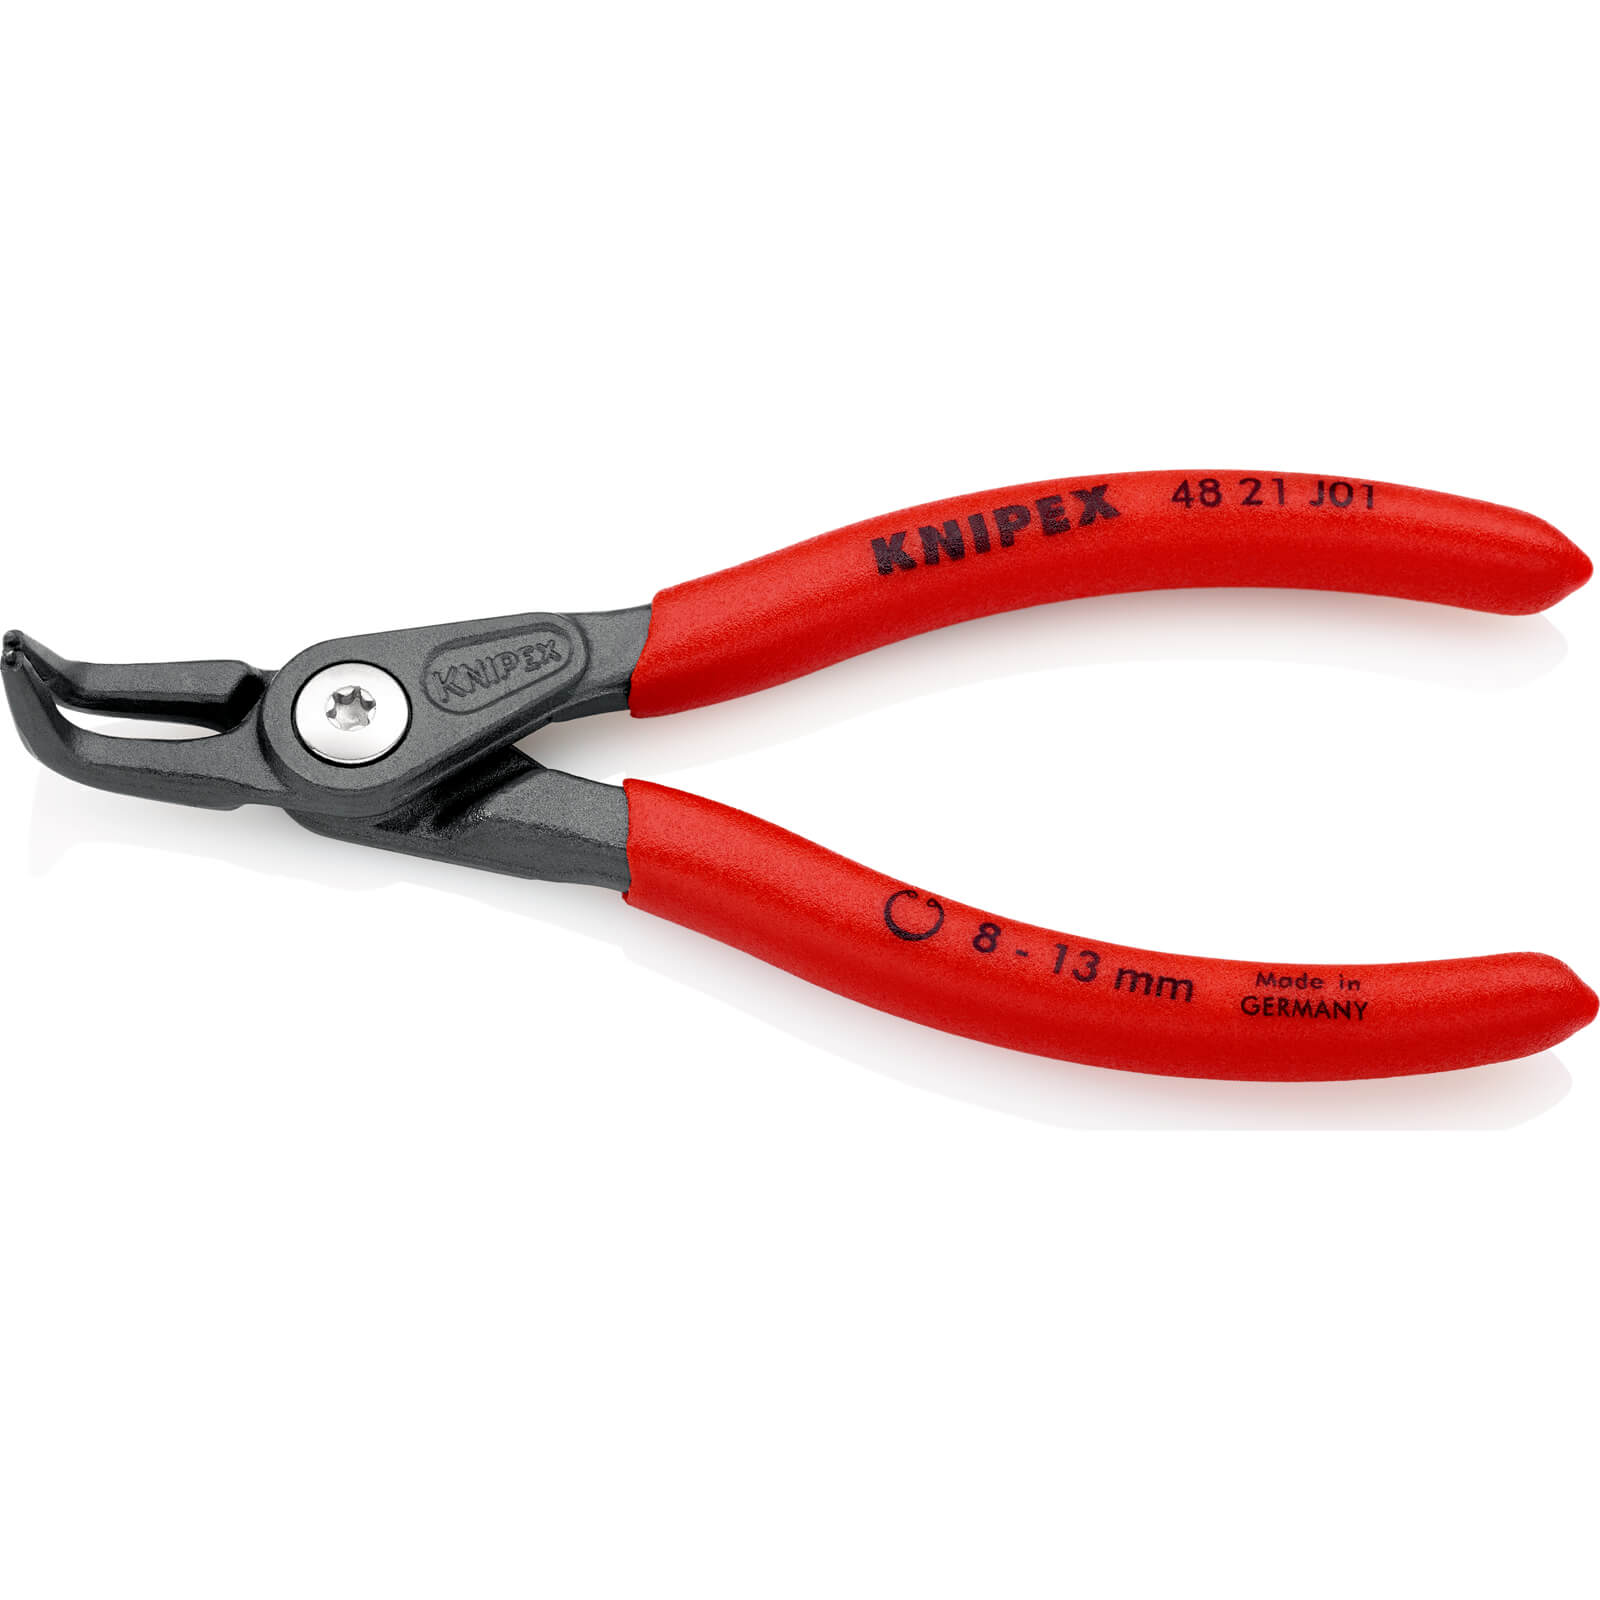 Image of Knipex 48 21 Internal 90 Degree Precision Circlip Pliers 8mm - 13mm